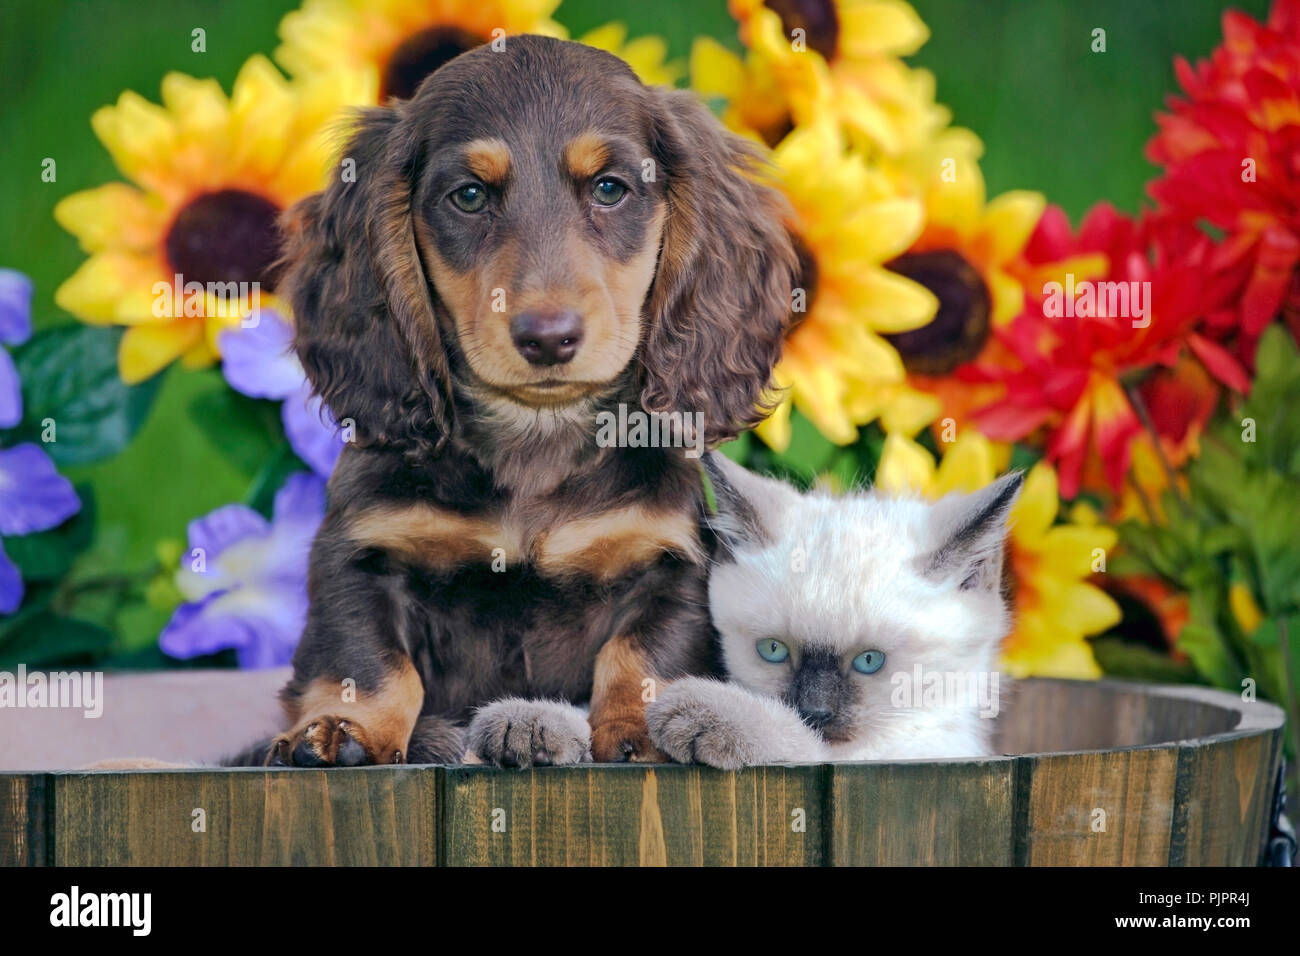 Dachshund puppy and Siamese kitten together in wooden barrel Stock Photo